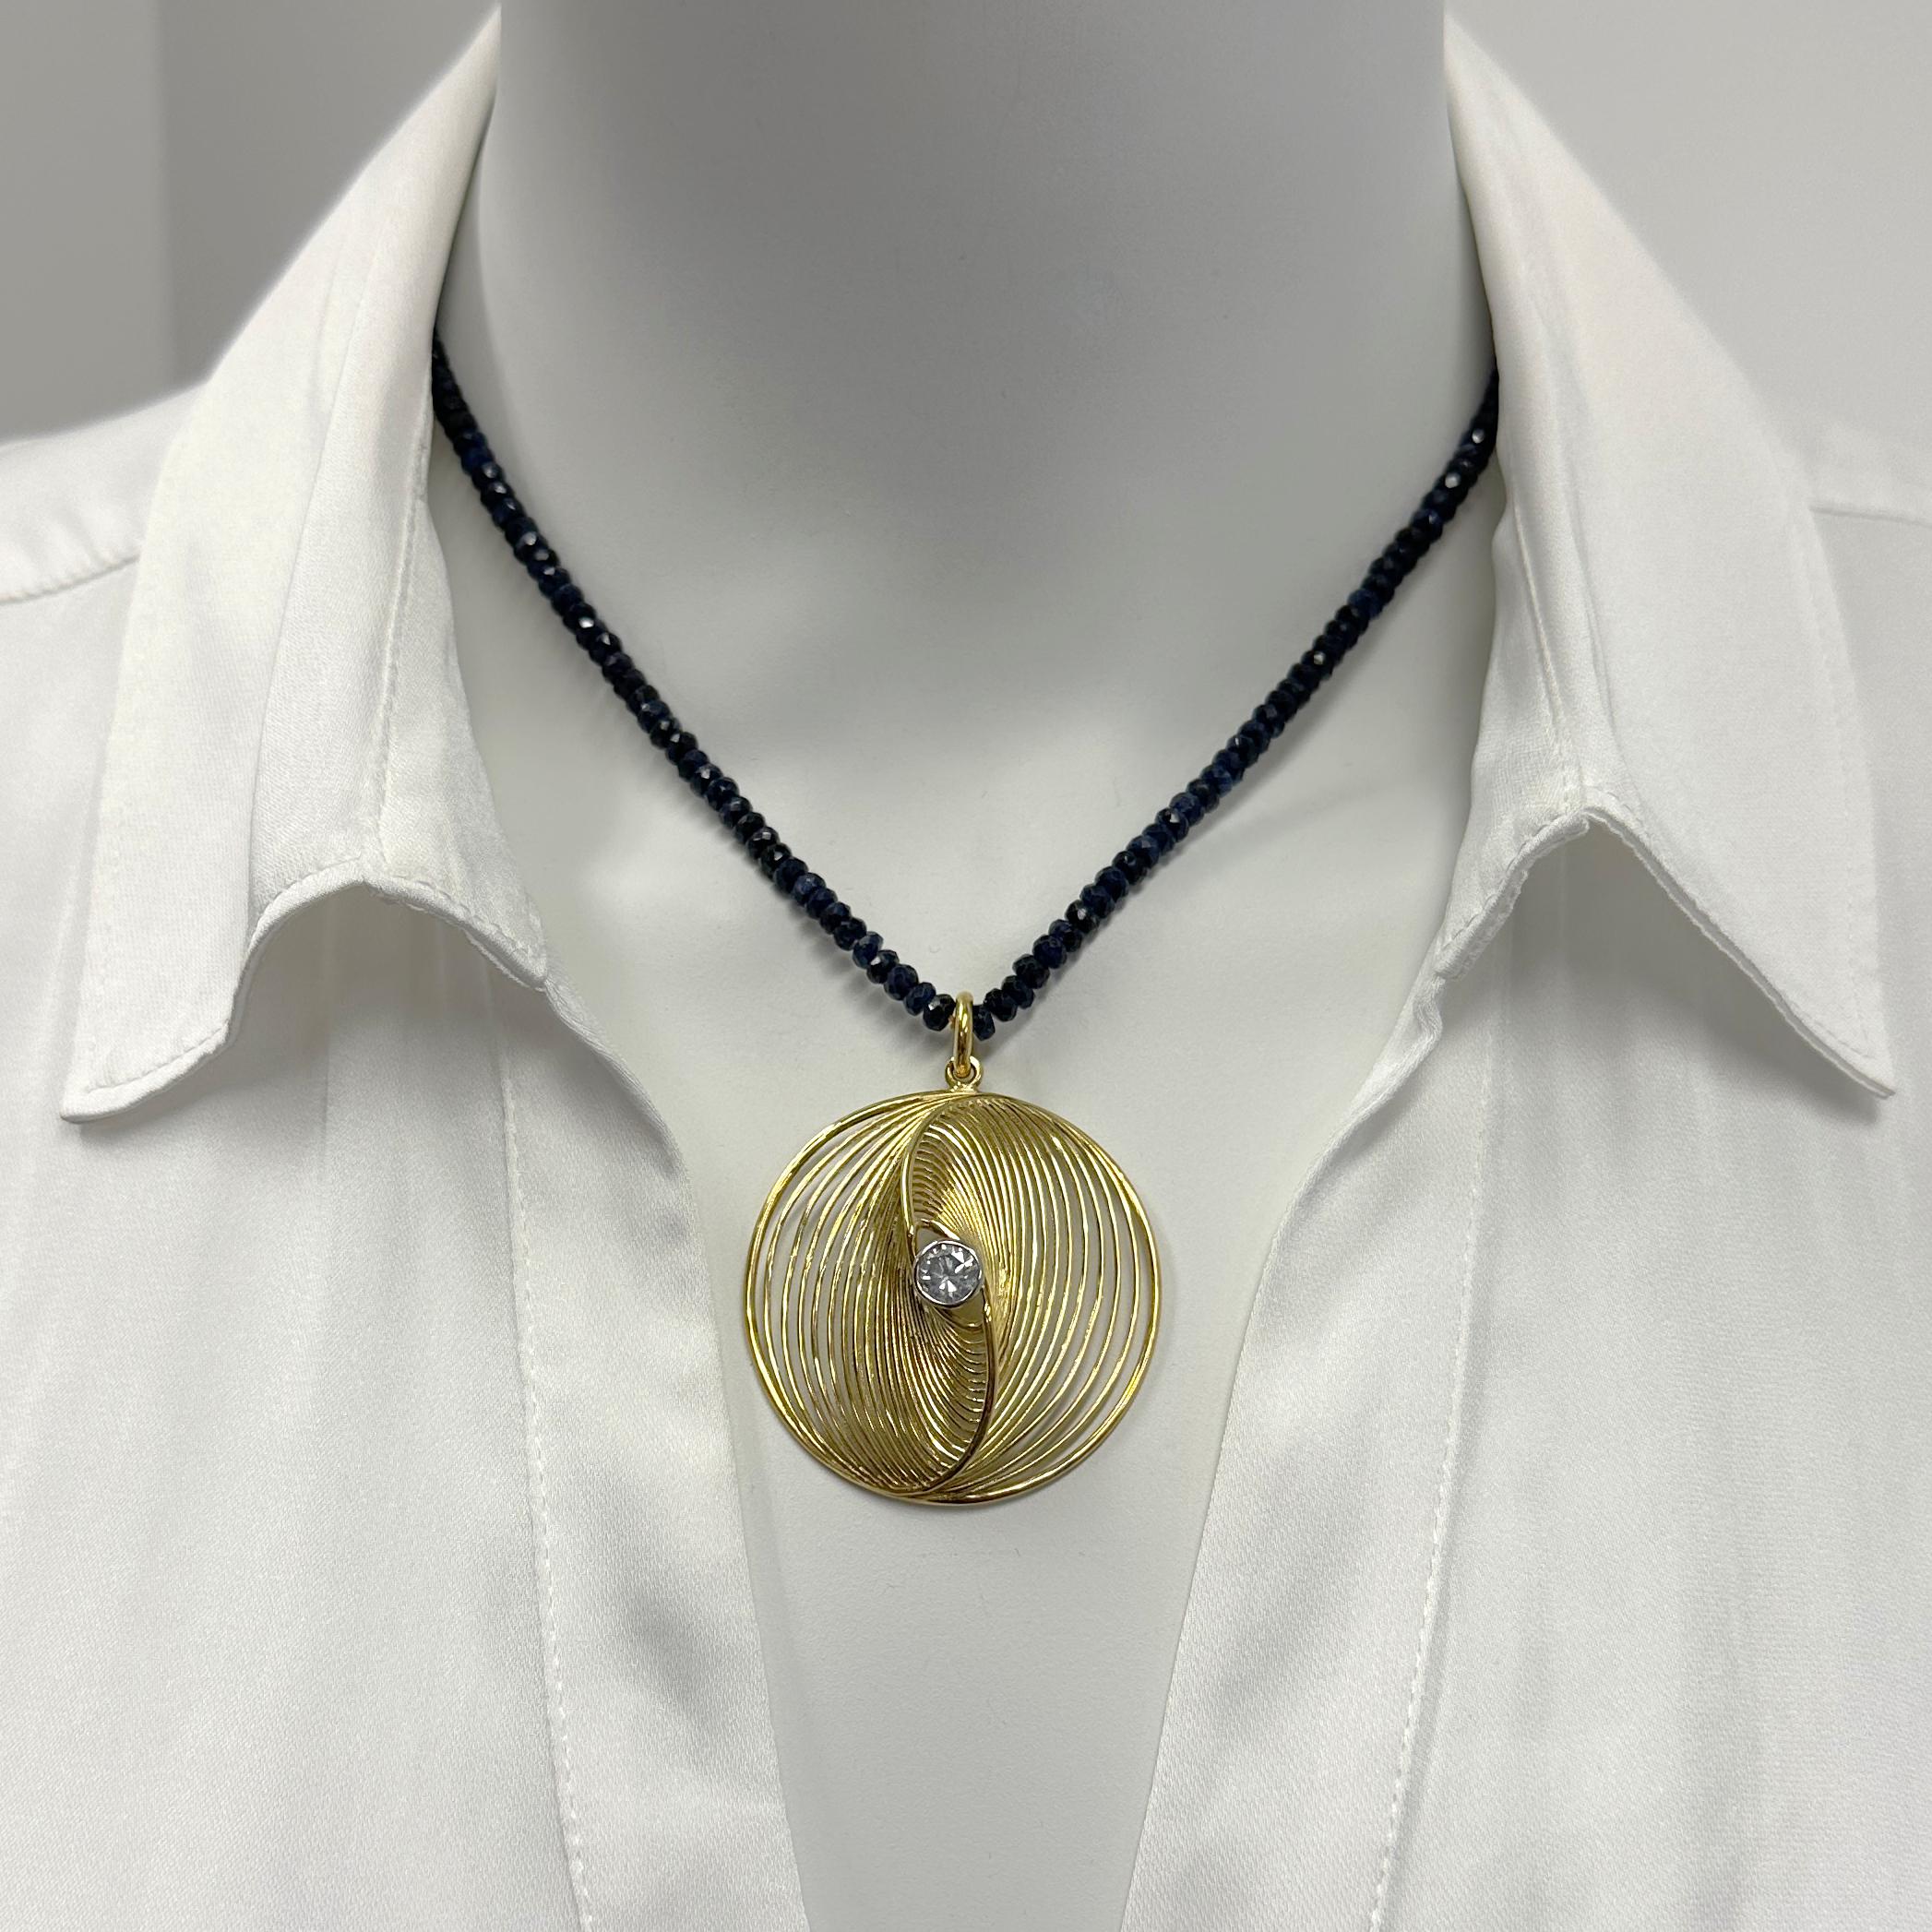 This bold and graphic new pendant by Eytan Brandes is based on a design suggested by Eytan's brother Gidi, an artist living in Israel.  Like a swirling yin and yang symbol, waves of rich 18 karat yellow gold wire curve gracefully into a middle --